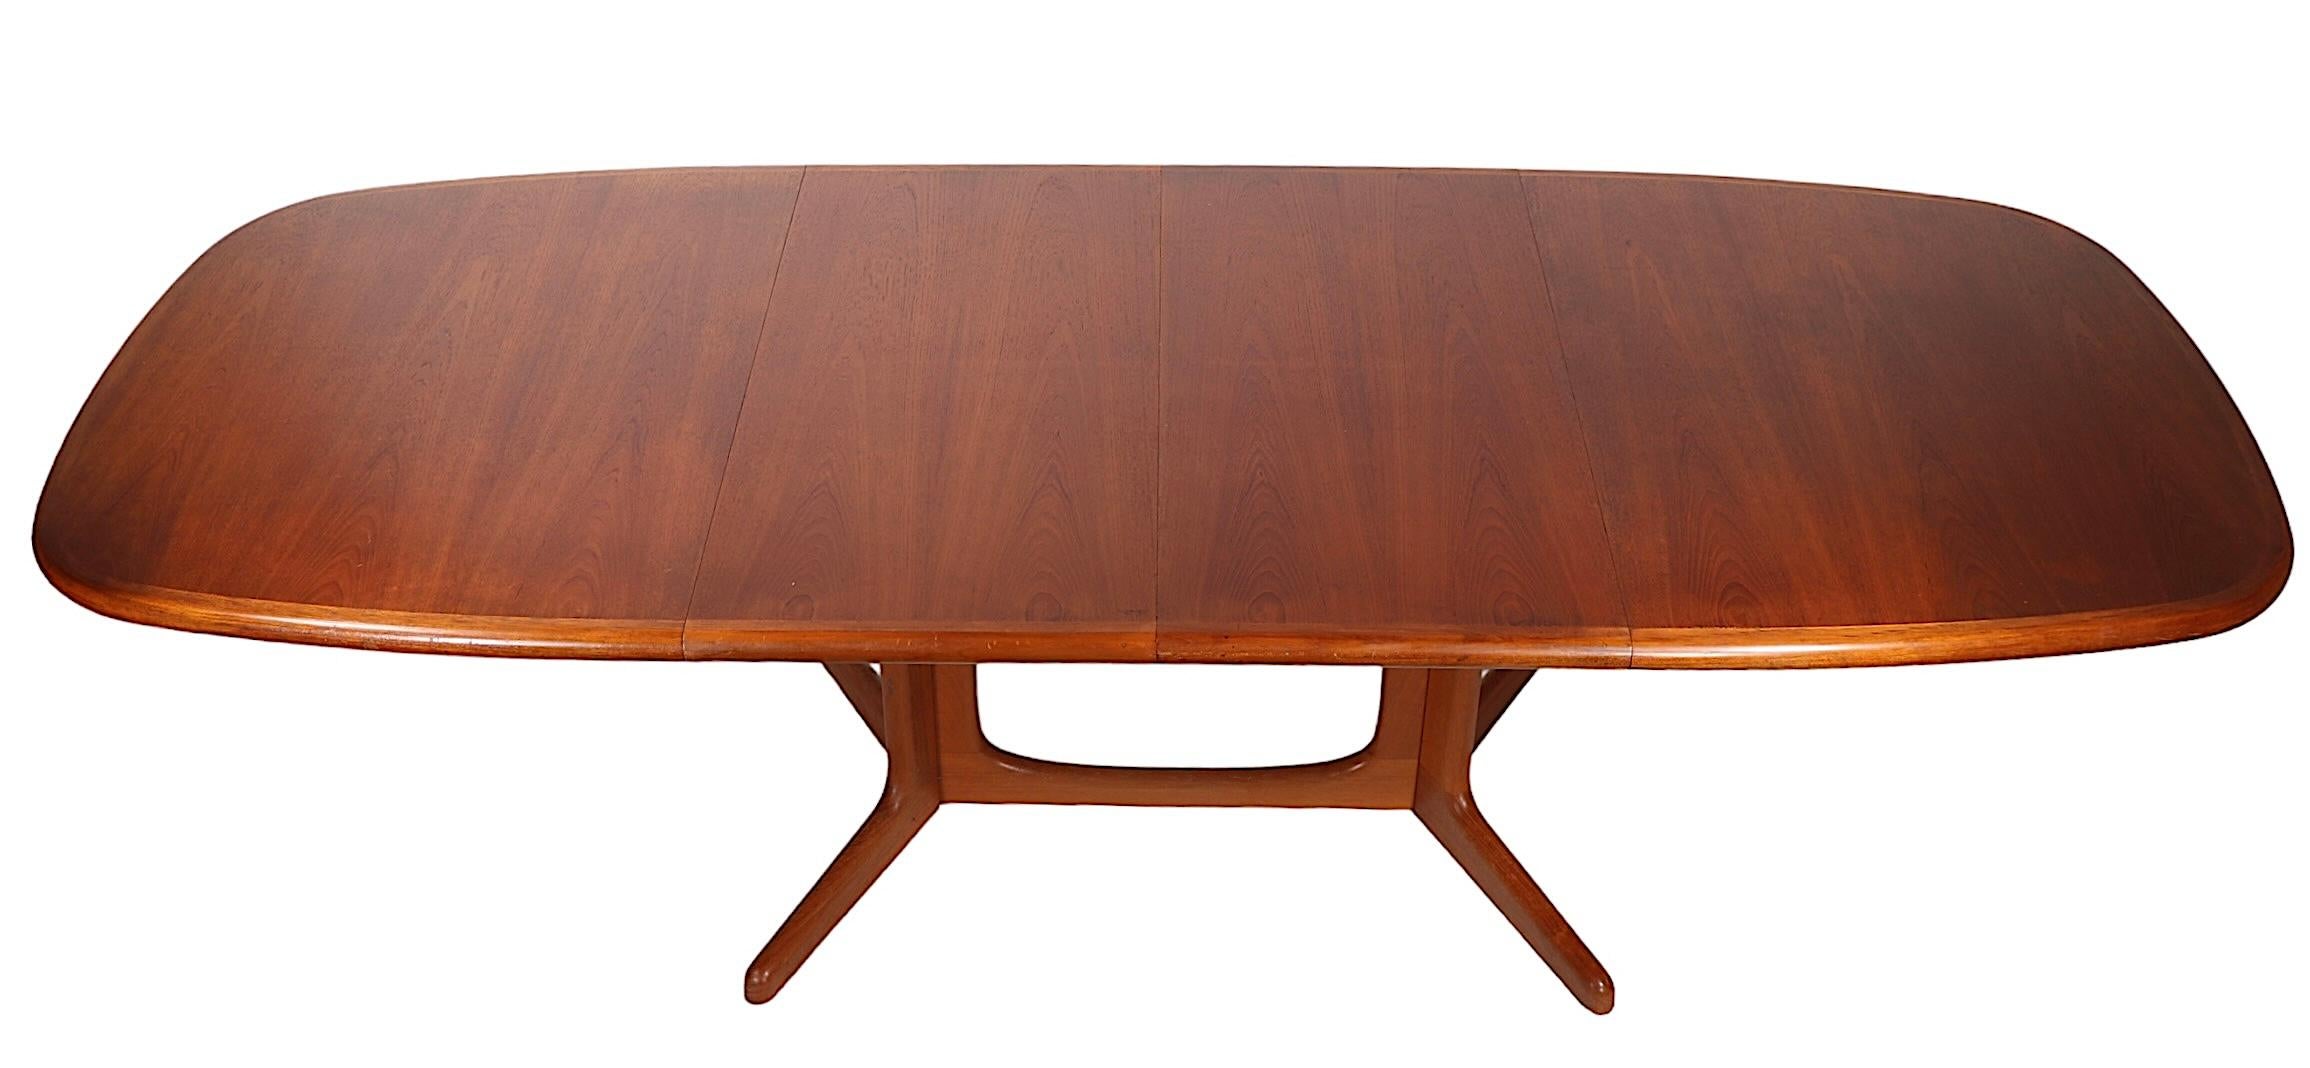 Danish Mid Century Oval Teak Dining Table by Niels Otto Moller for Gudme c 1970s For Sale 9